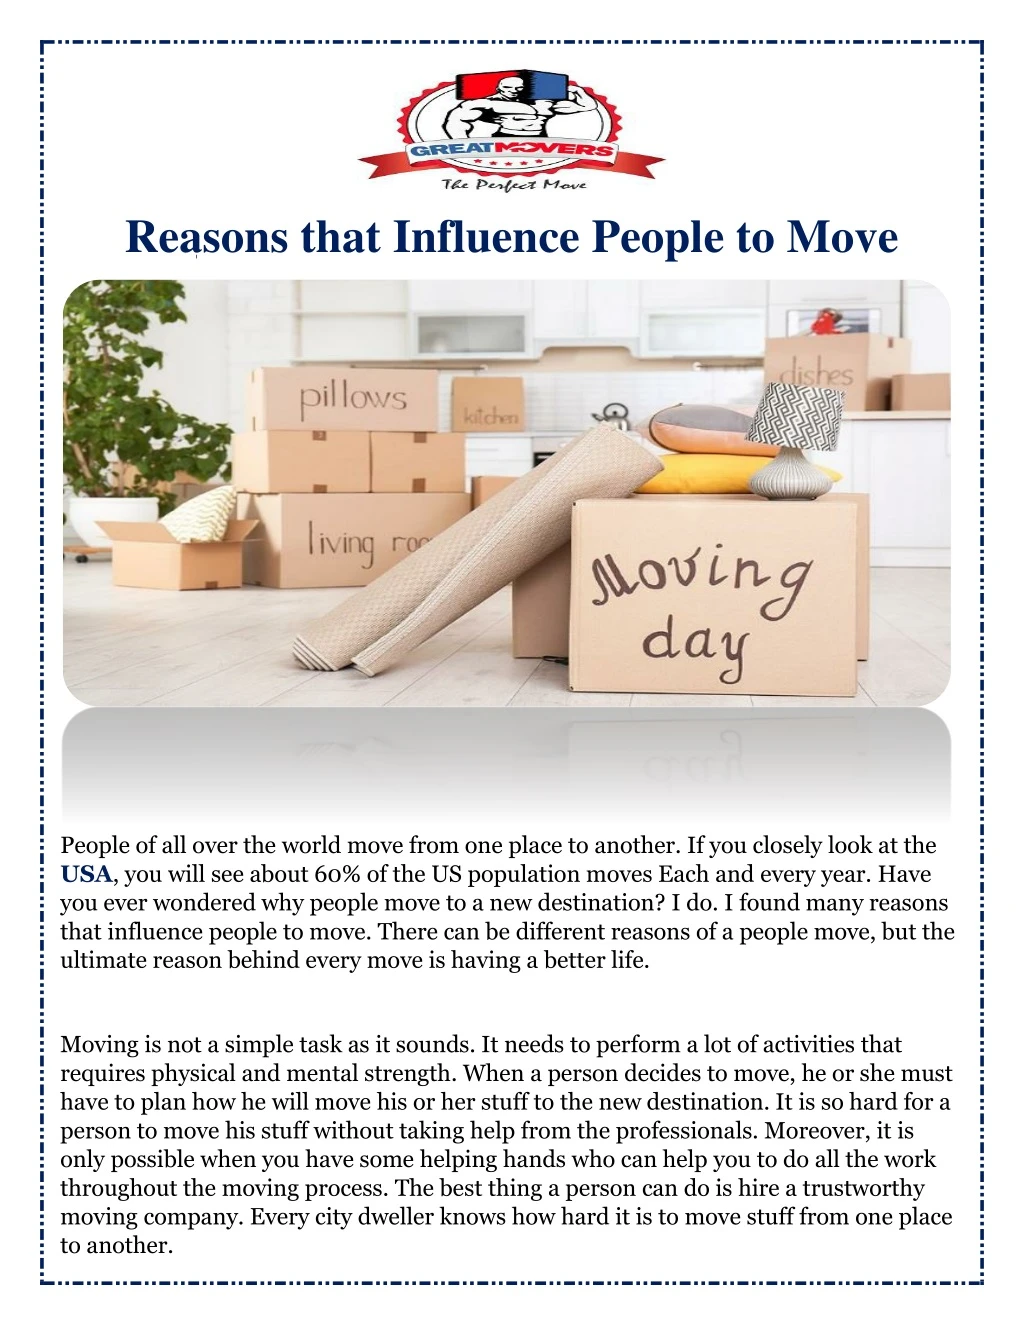 reasons that influence people to move